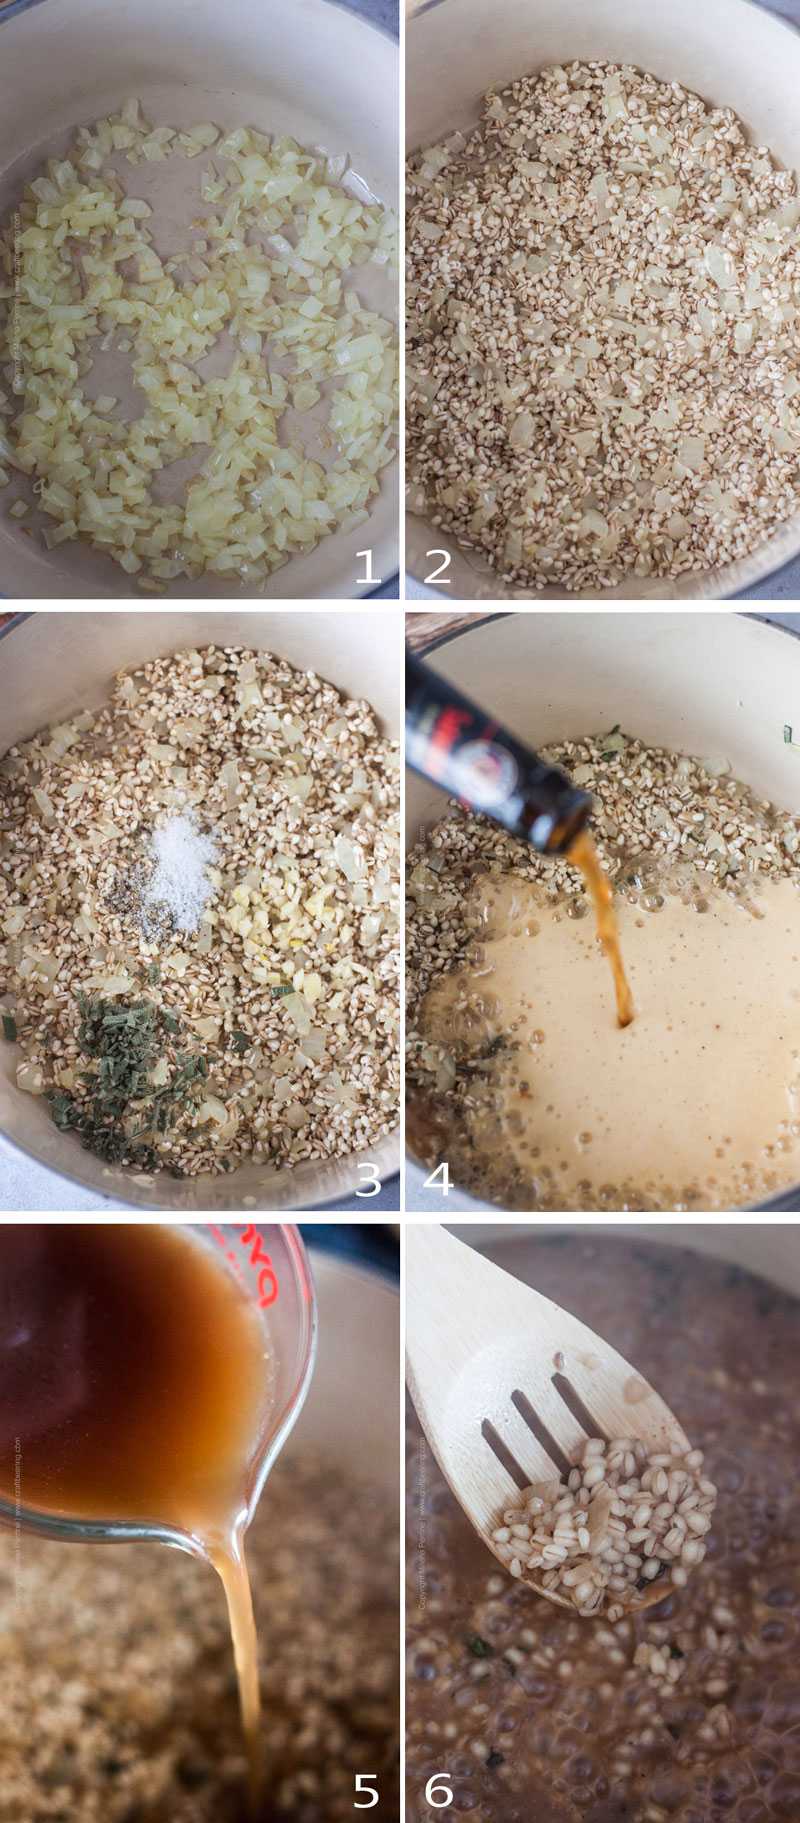 Image grid with the steps to cook orzotto in a Dutch oven.